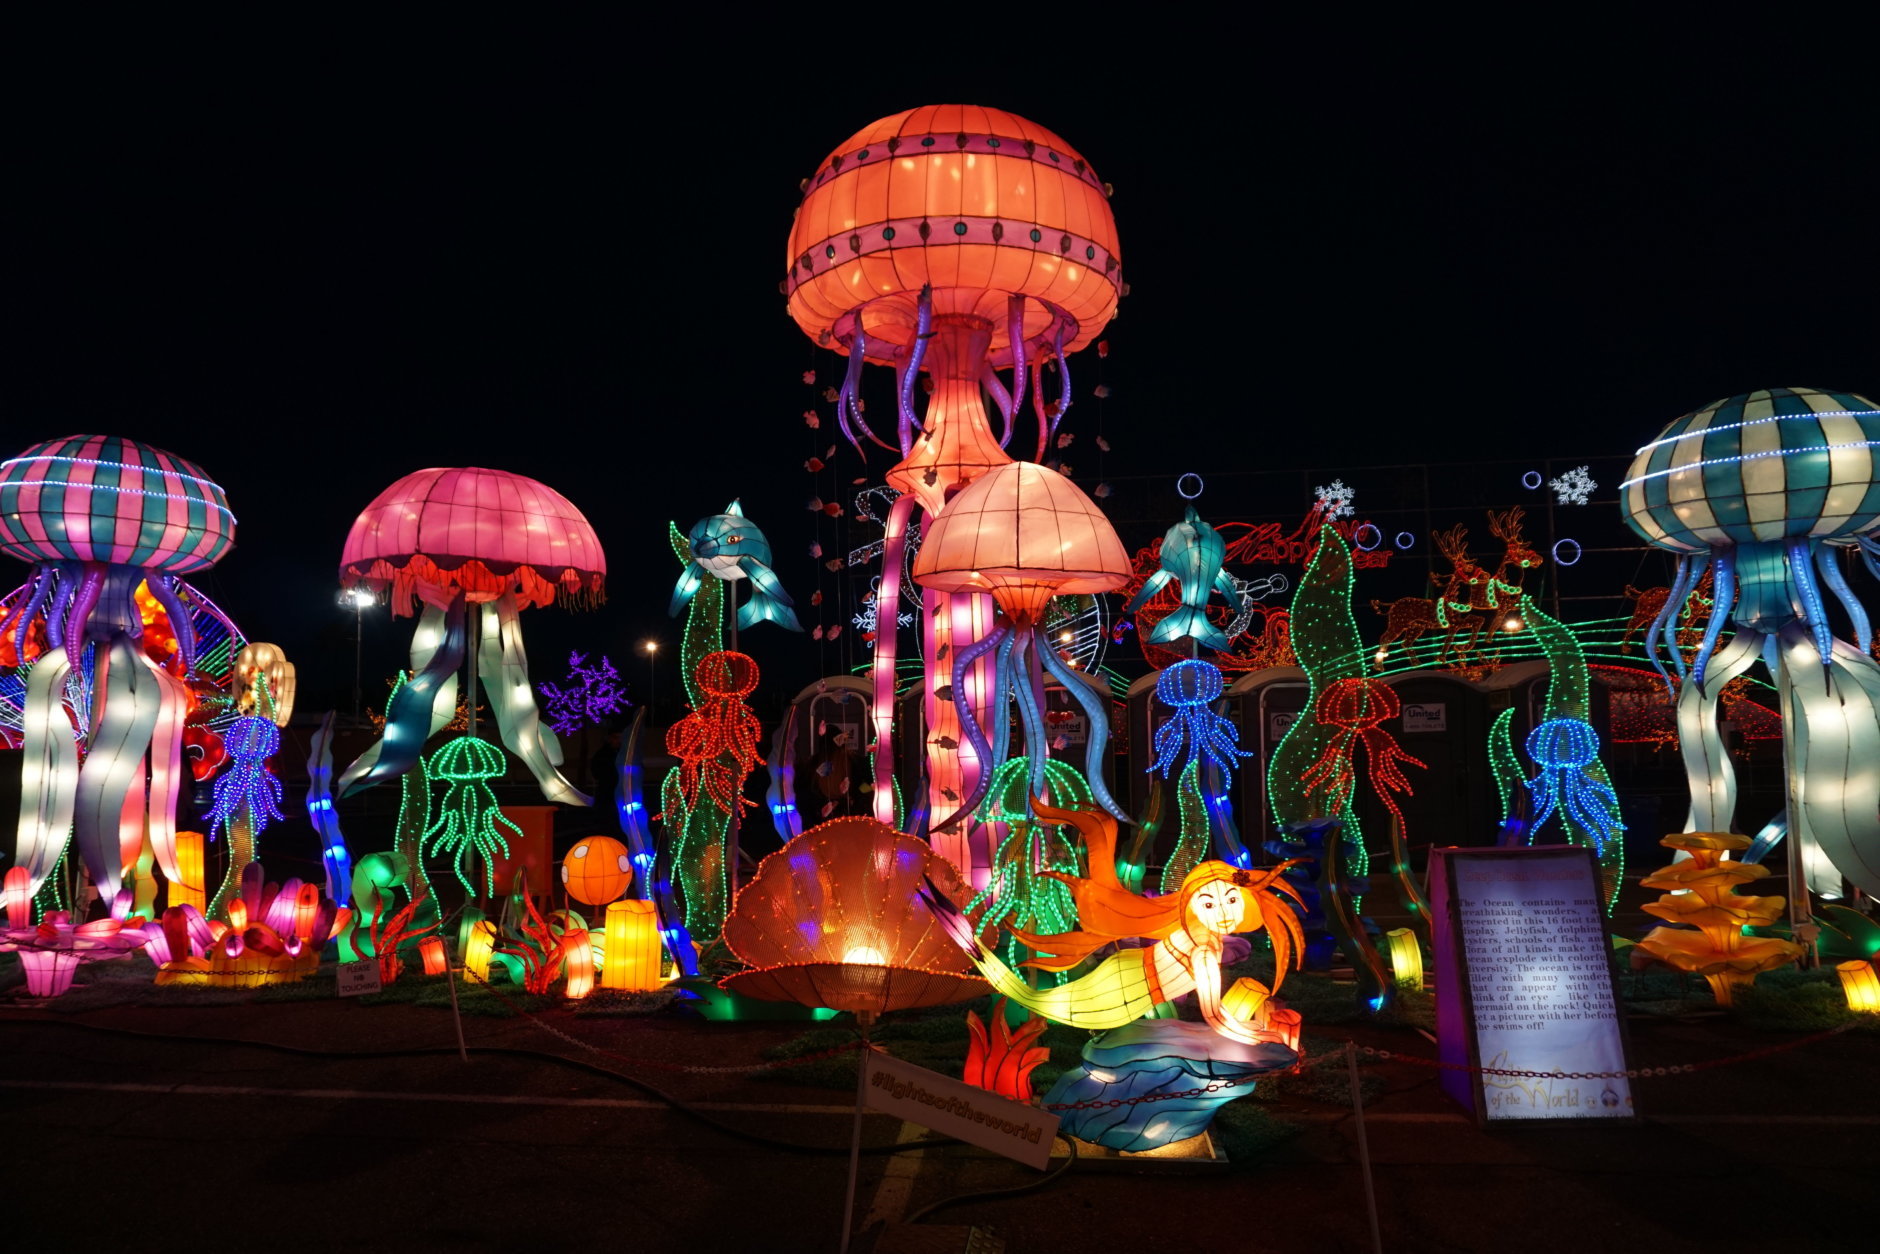 LightUP Fest will be one of the largest lighting displays on the East Coast, and will combine traditional Chinese lanterns with high-tech lighting technology. (Courtesy LightUP Fest)